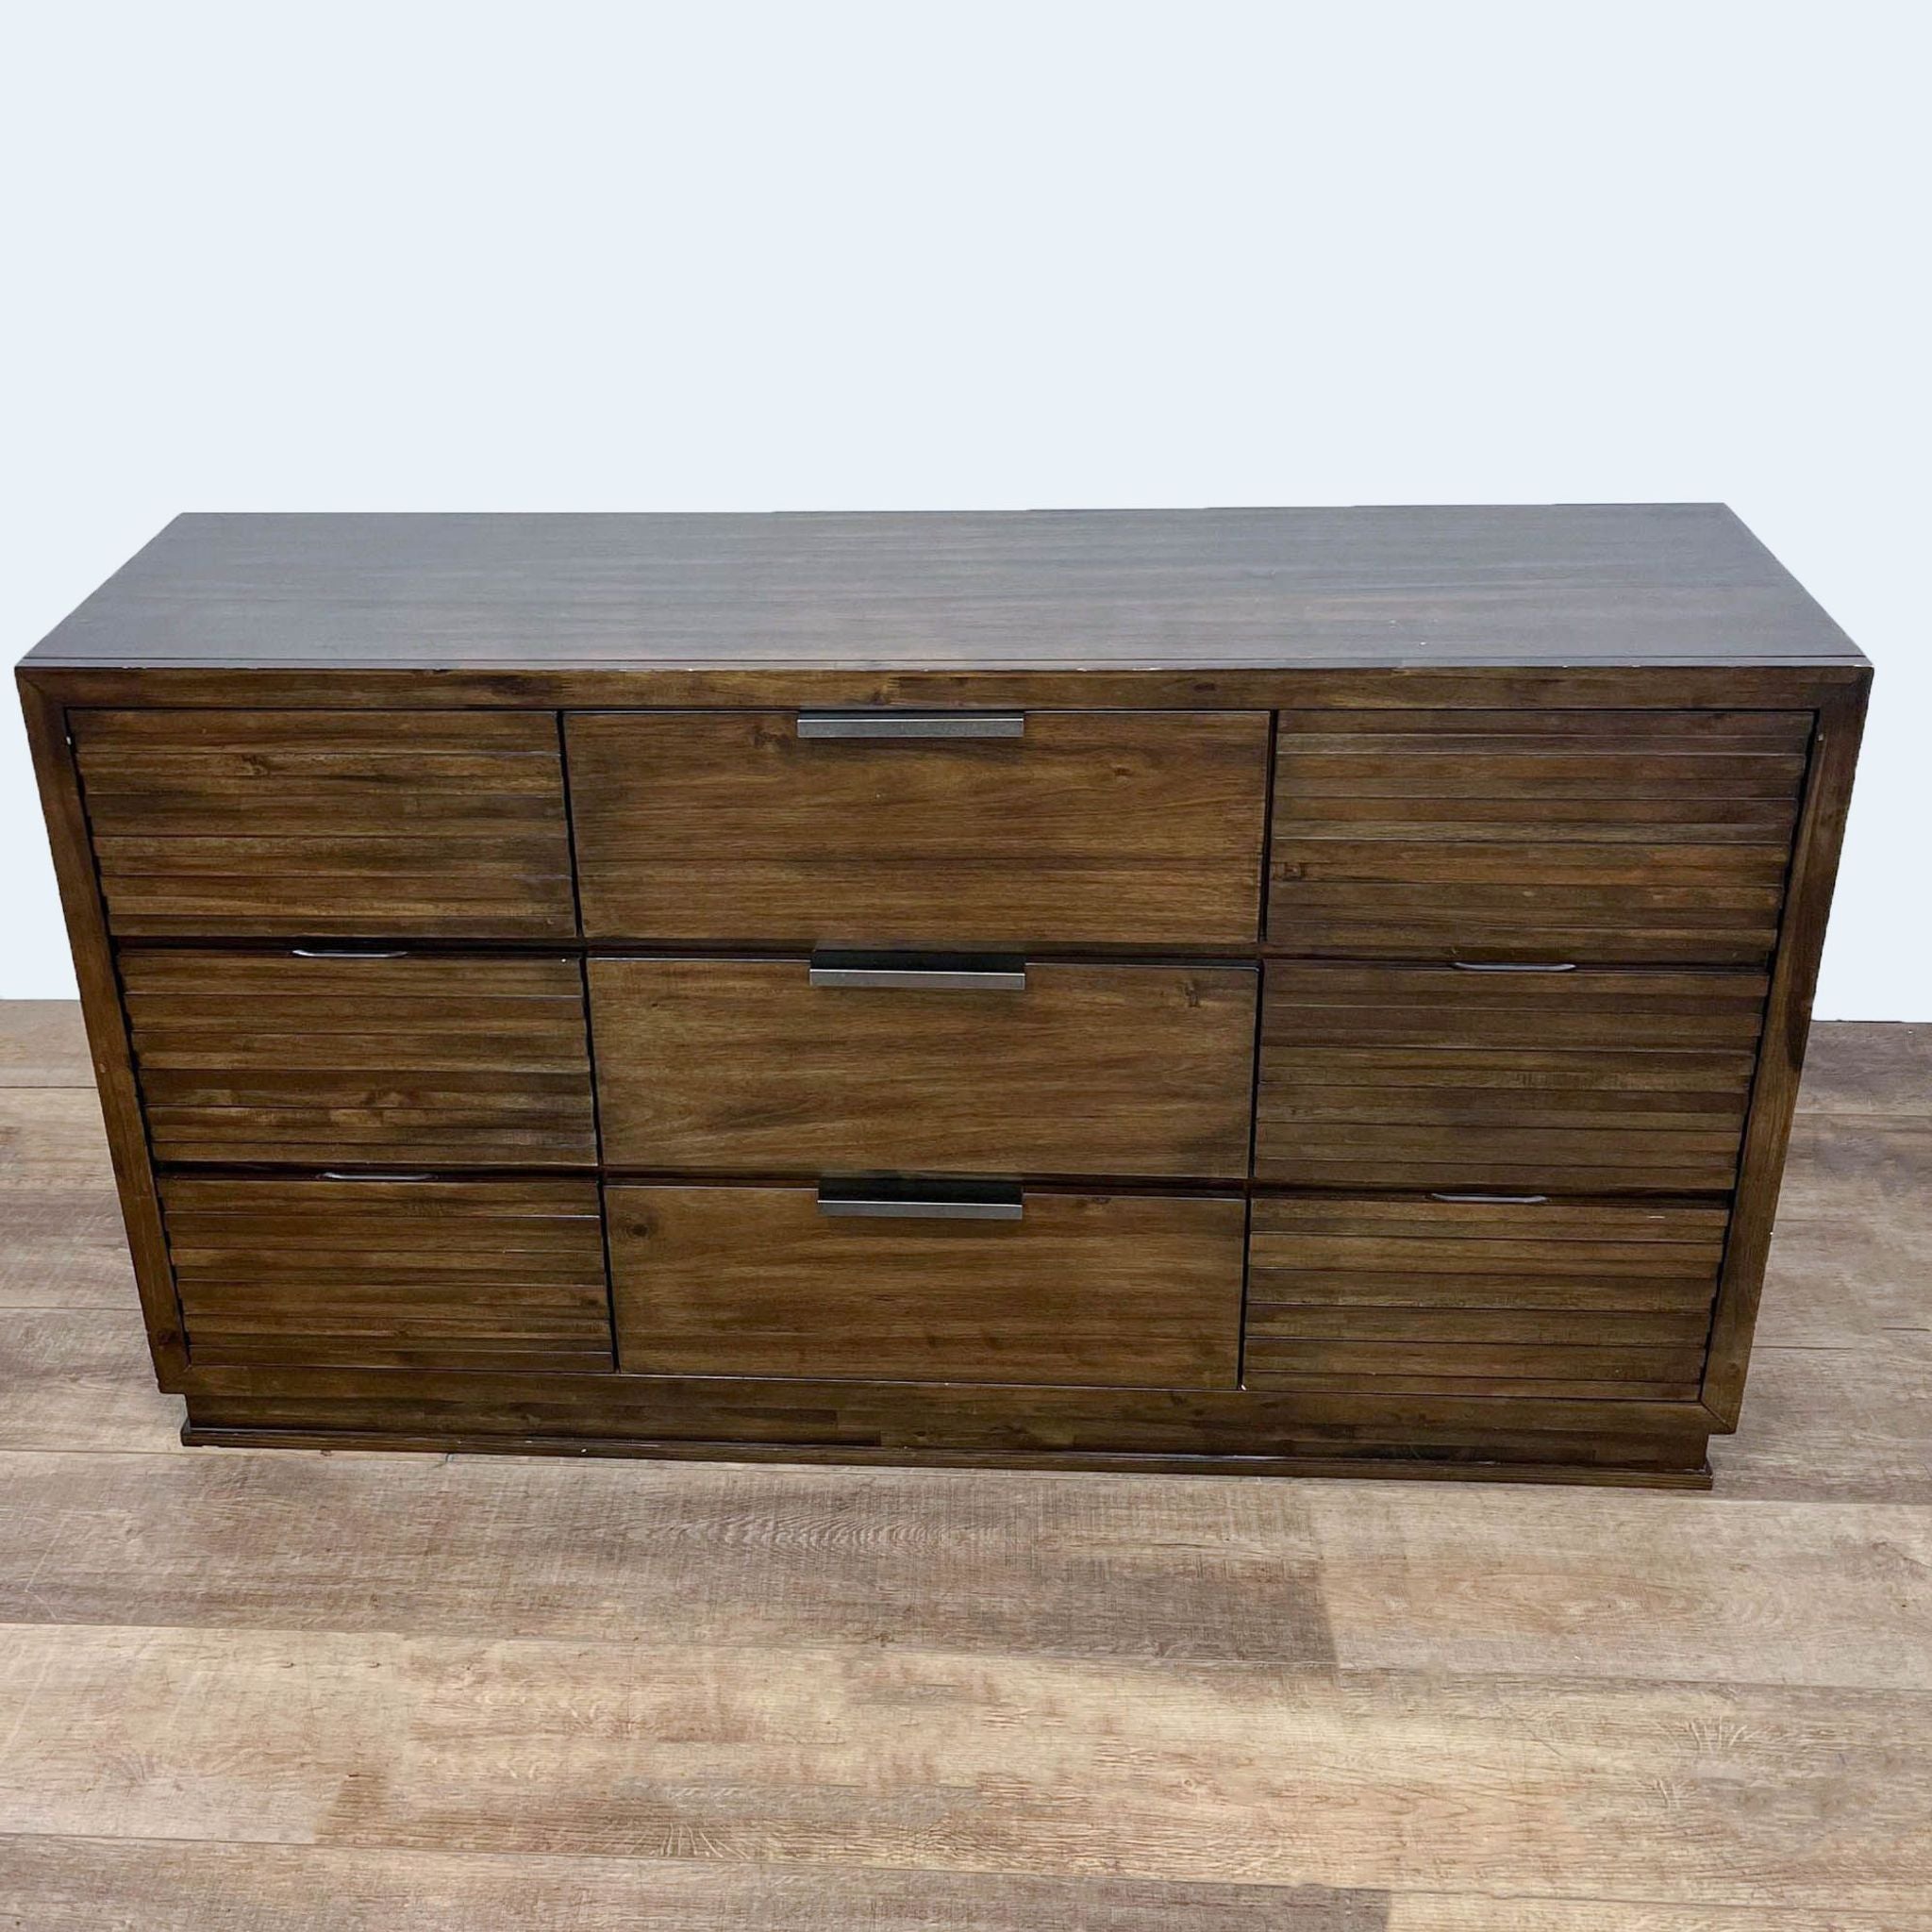 Furniture of America 6-drawer wooden dresser with walnut finish and combination of pull-handle and slatted front drawers.